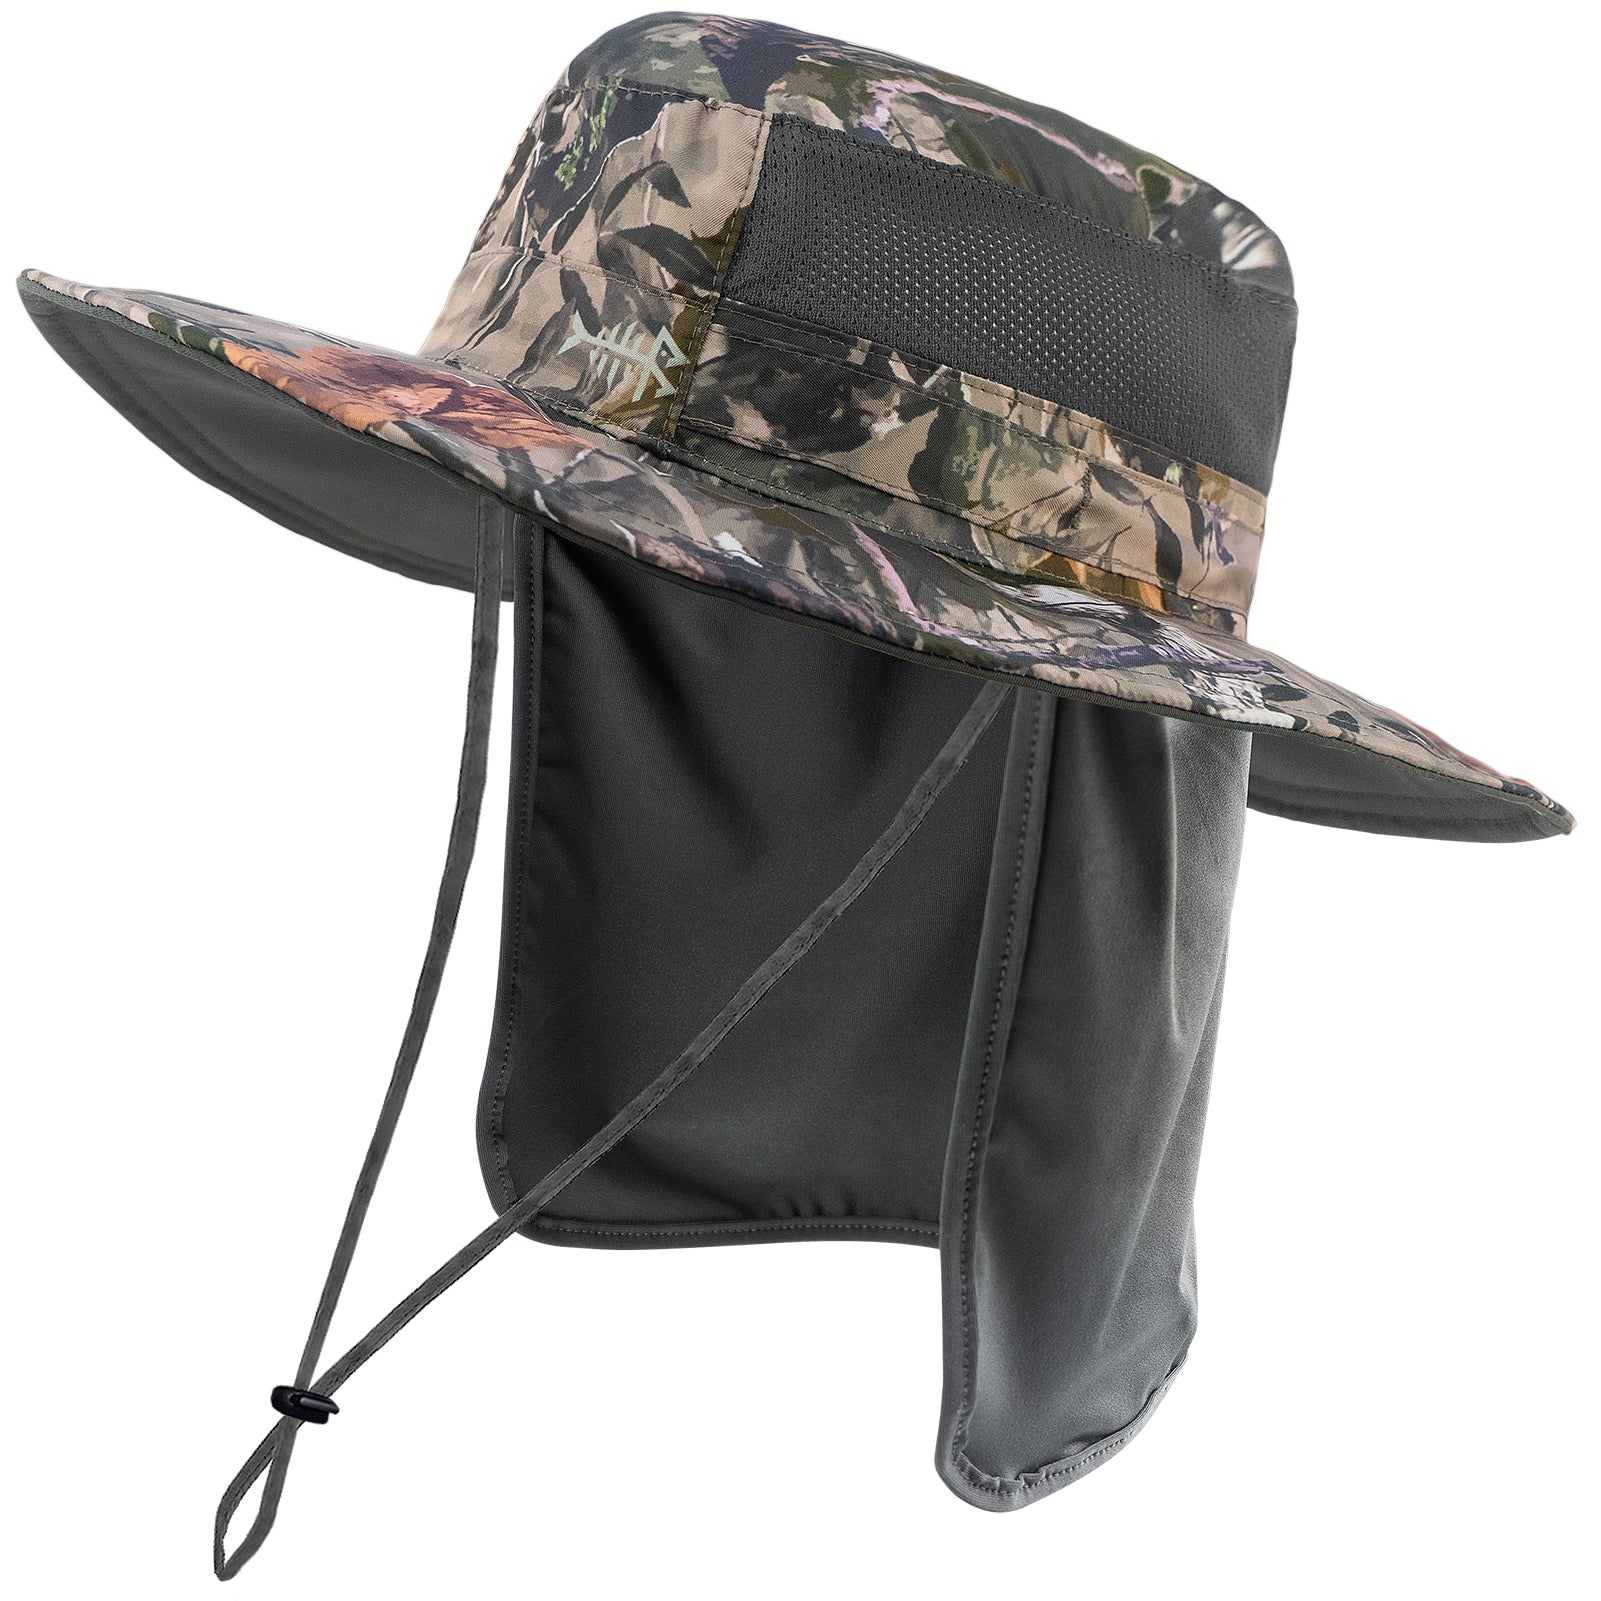 Unisex Wide Brim Sun Protection Bucket Hat with Neck Flap UPF 50+ Fis –  OHSUNNY